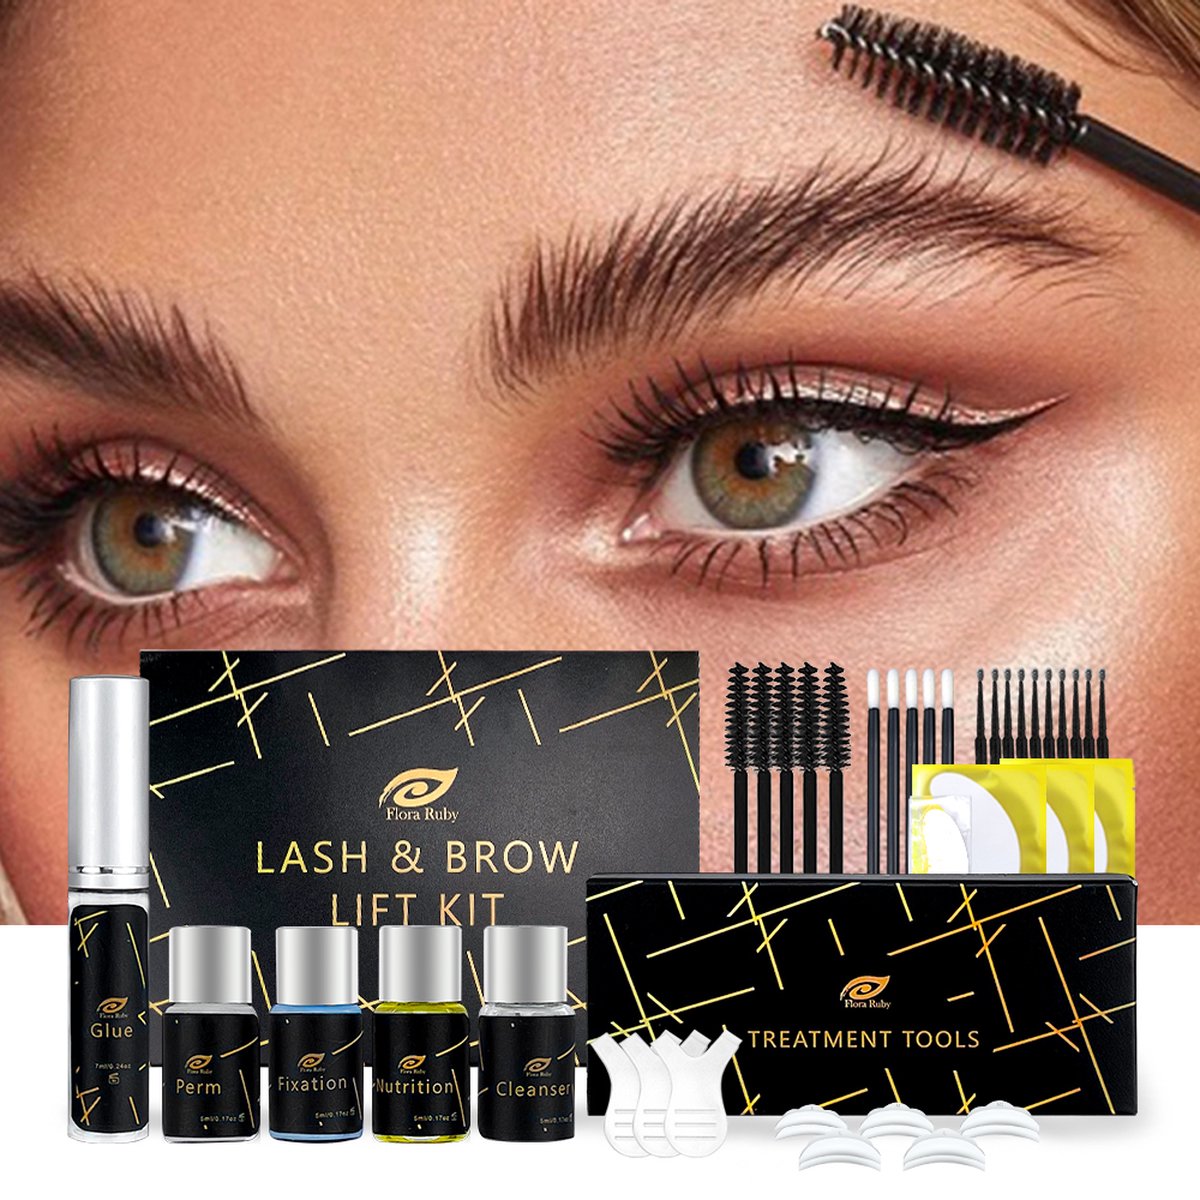 Flora Ruby Professionele 2 in 1 Lash Lift & Brow Lamination Kit - Wimper & Wenkbrauw Lifting Set - Permanente Wimperkruller - Brow Soap